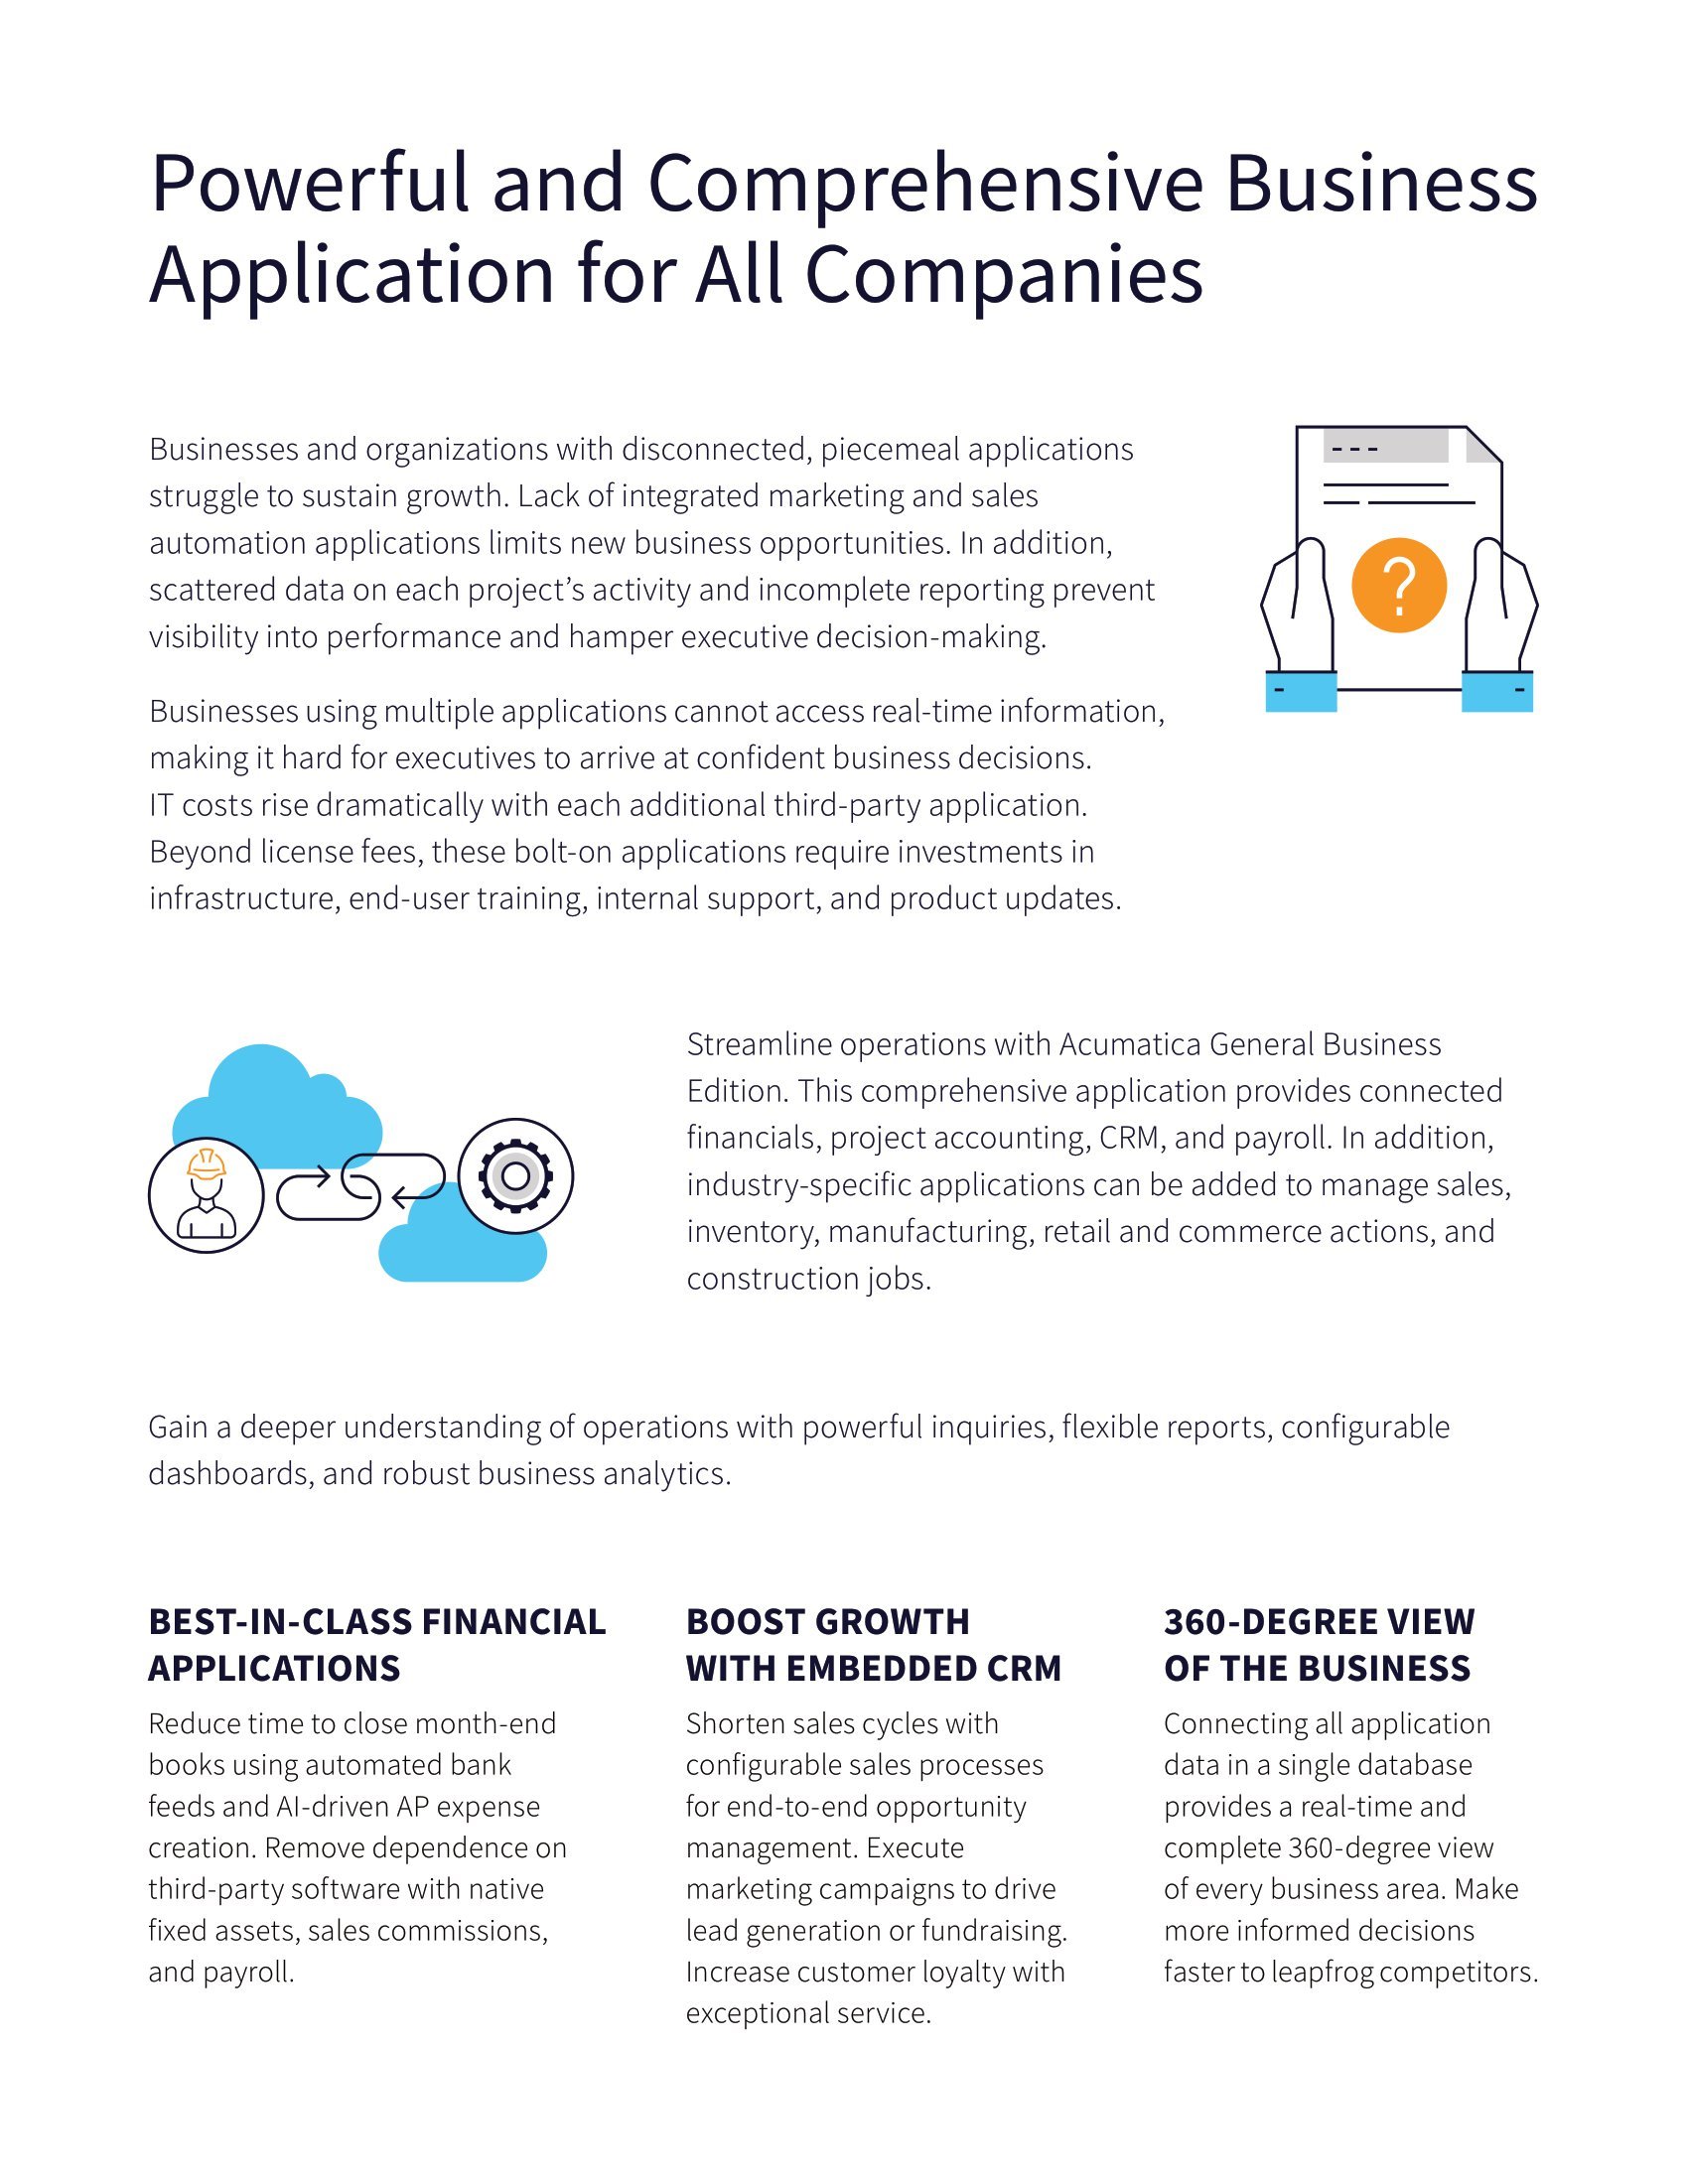 How to Grow Your Business Faster with Cloud ERP, page 1